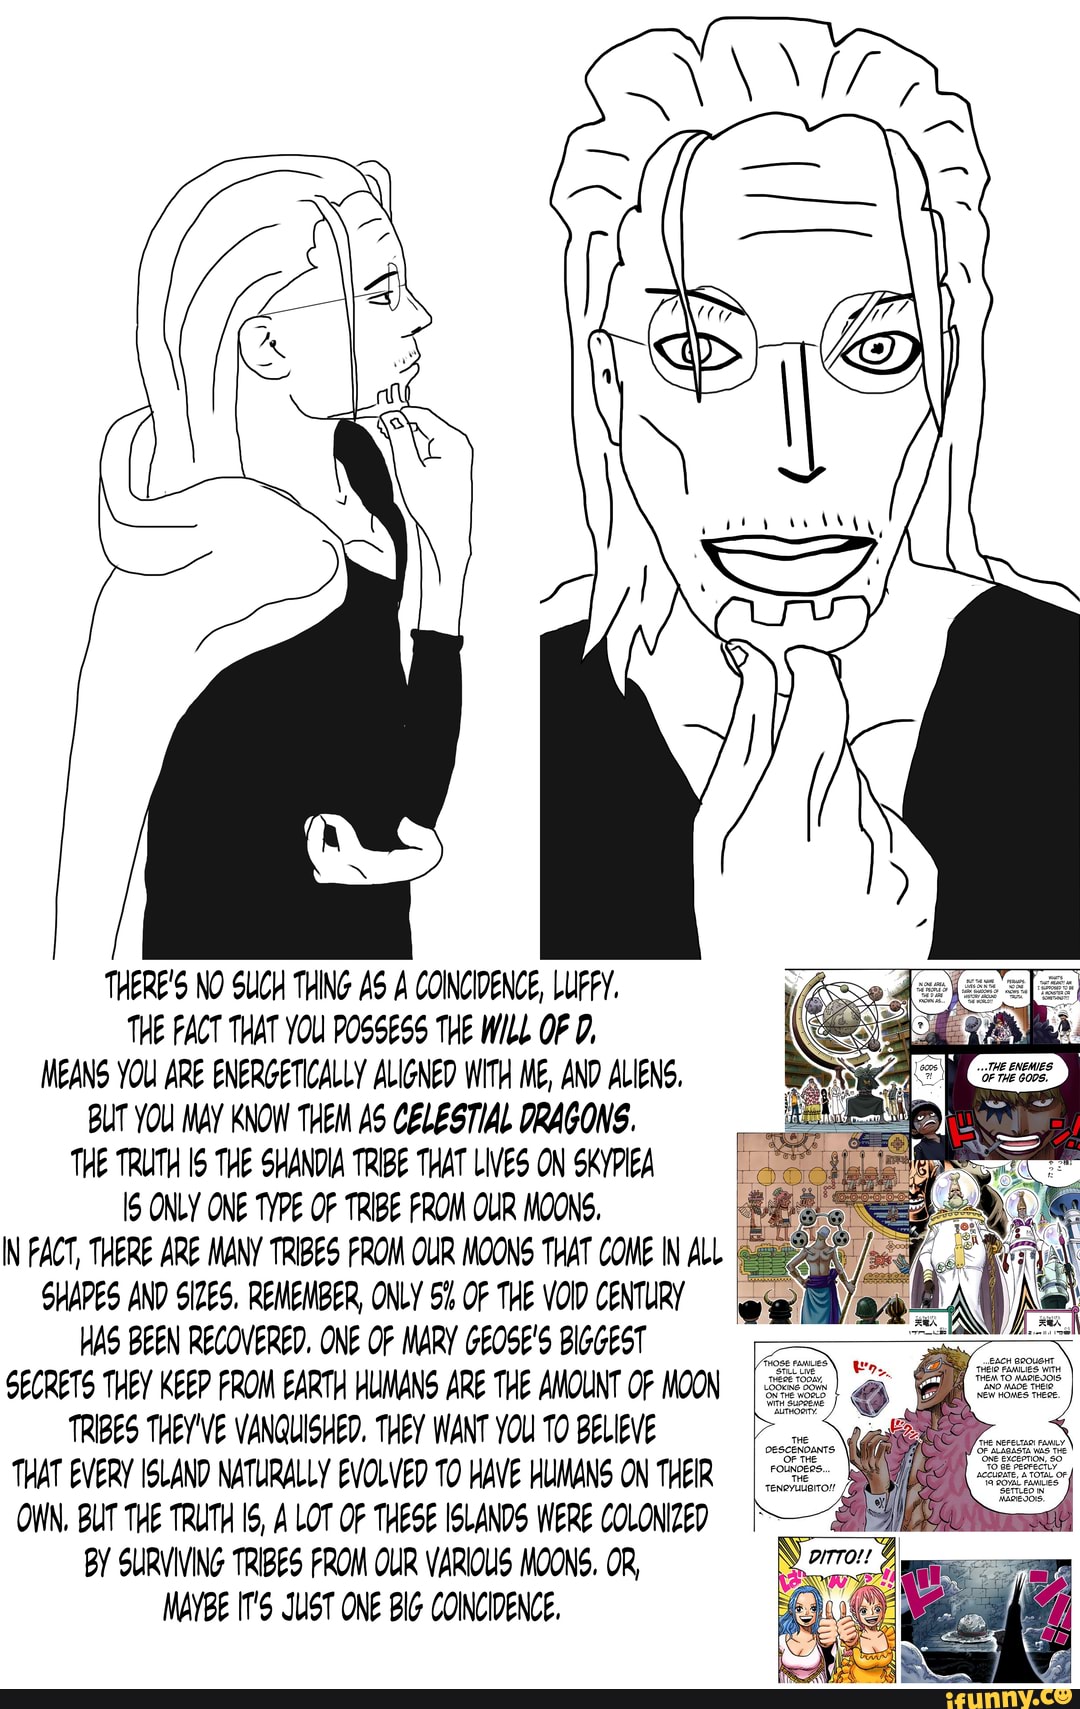 No this isn't a coincidence! : r/OnePiece